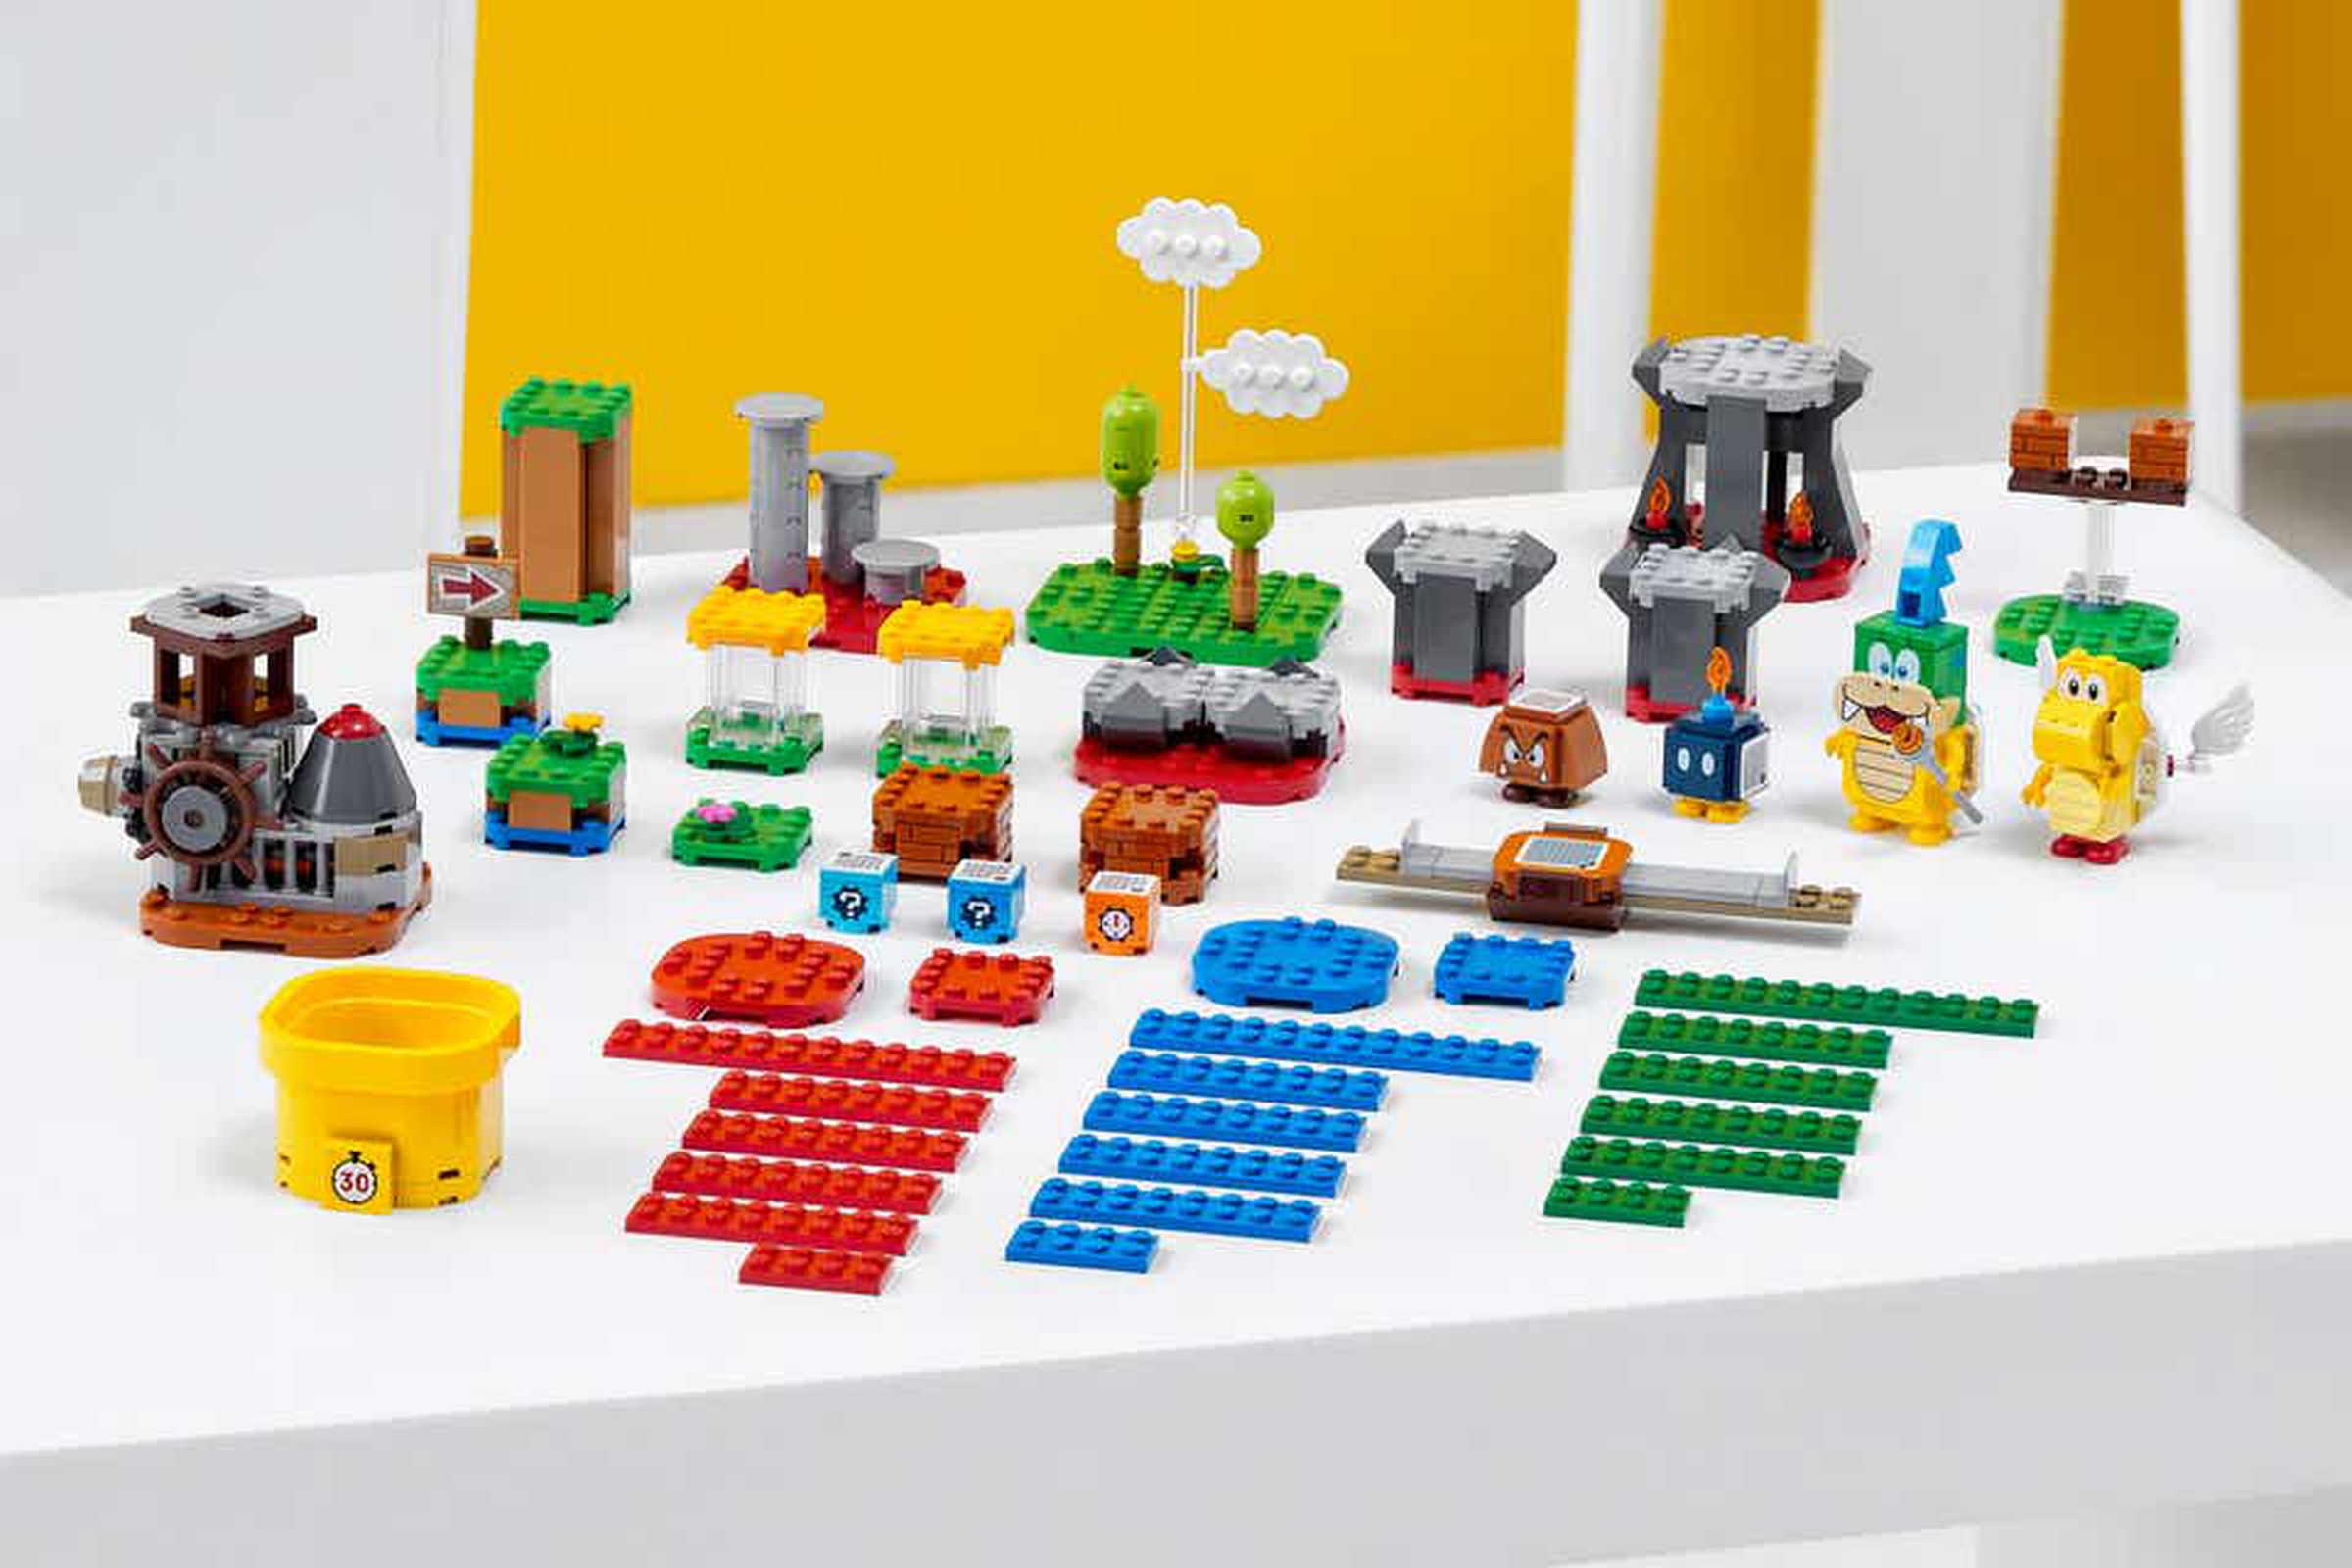 The new Master Your Adventure Maker Set includes 366 pieces.